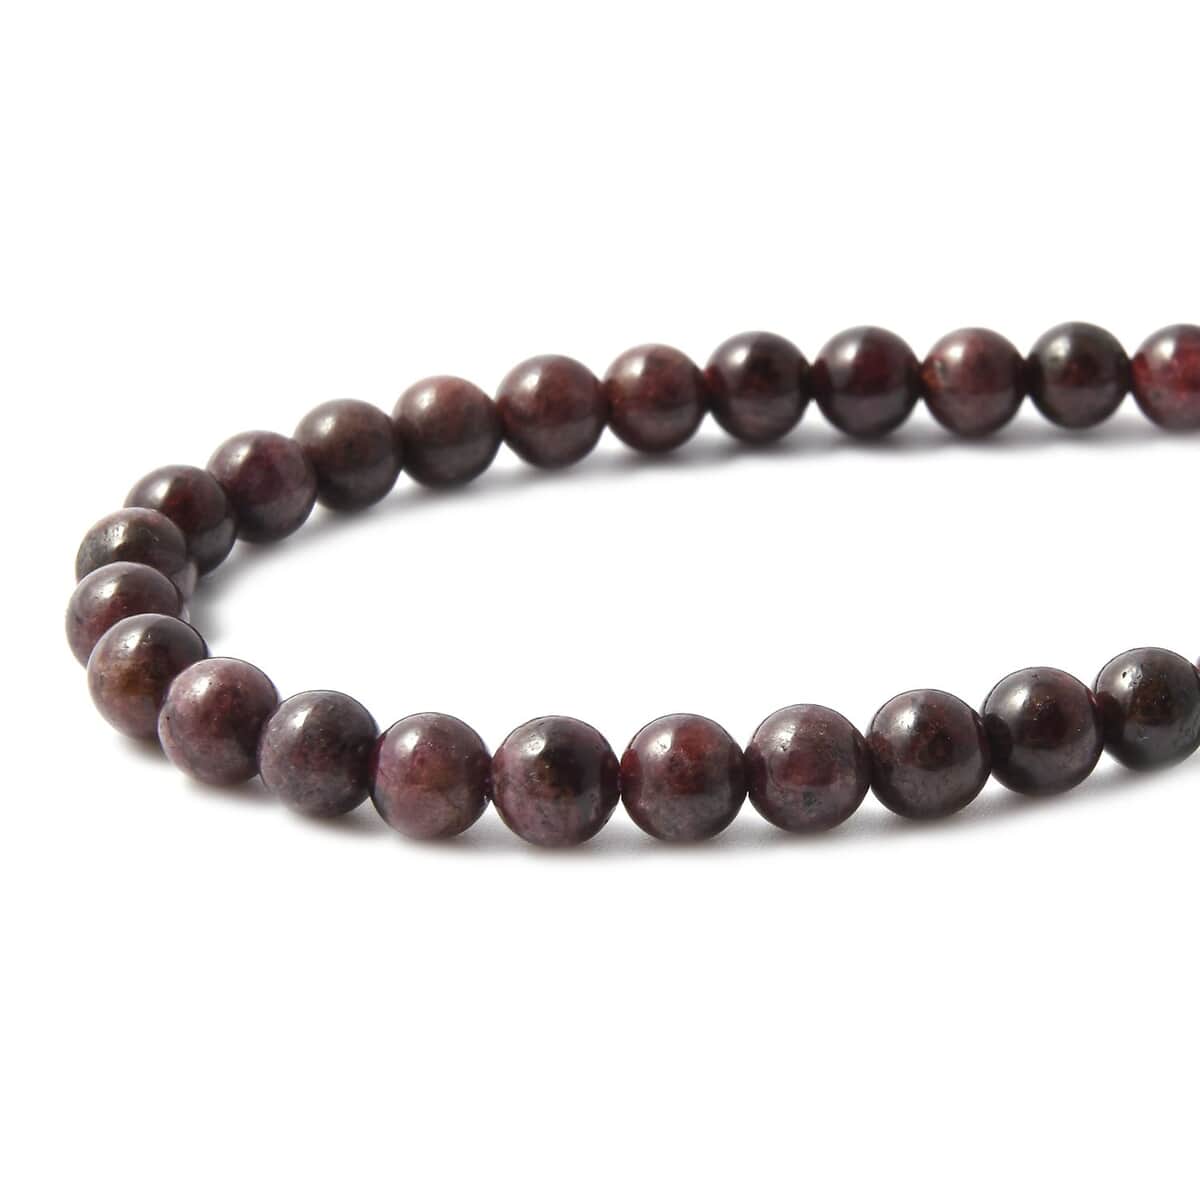 Mozambique Garnet 5-7mm Beaded Necklace (18-20 Inches) in Stainless Steel 165.00 ctw , Tarnish-Free, Waterproof, Sweat Proof Jewelry image number 2